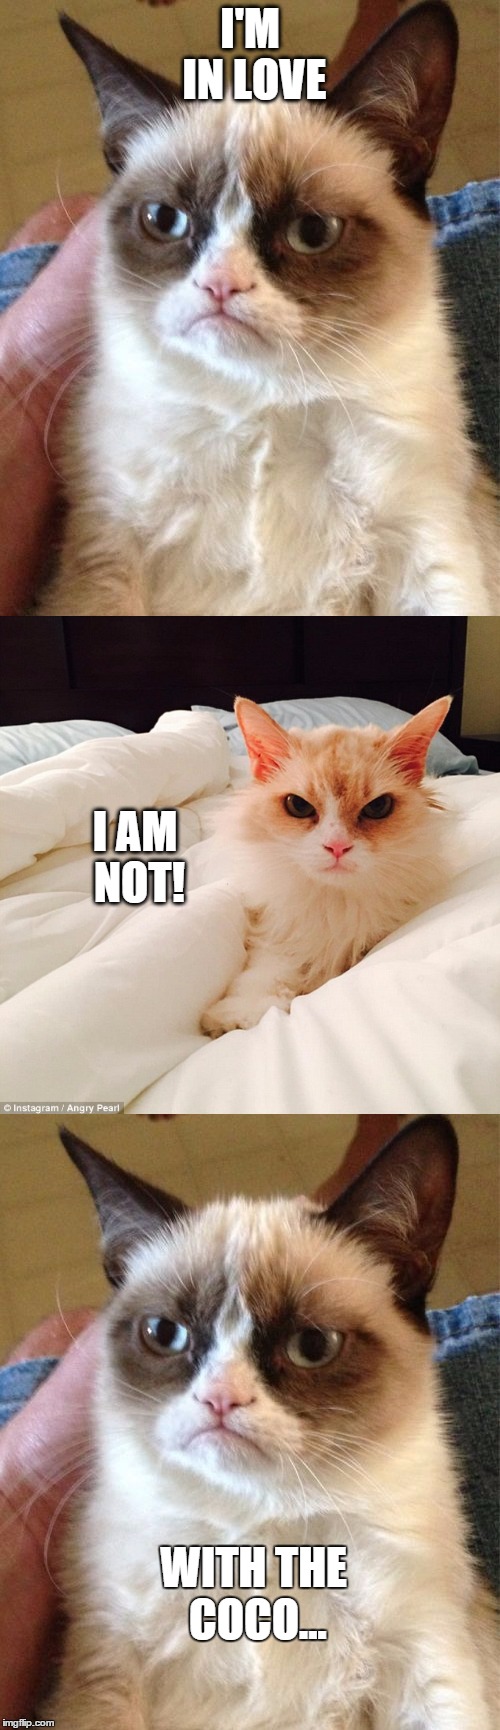 I love you....not | I'M IN LOVE; I AM NOT! WITH THE COCO... | image tagged in memes,grumpy cat,angry pearl,funny cats,love | made w/ Imgflip meme maker